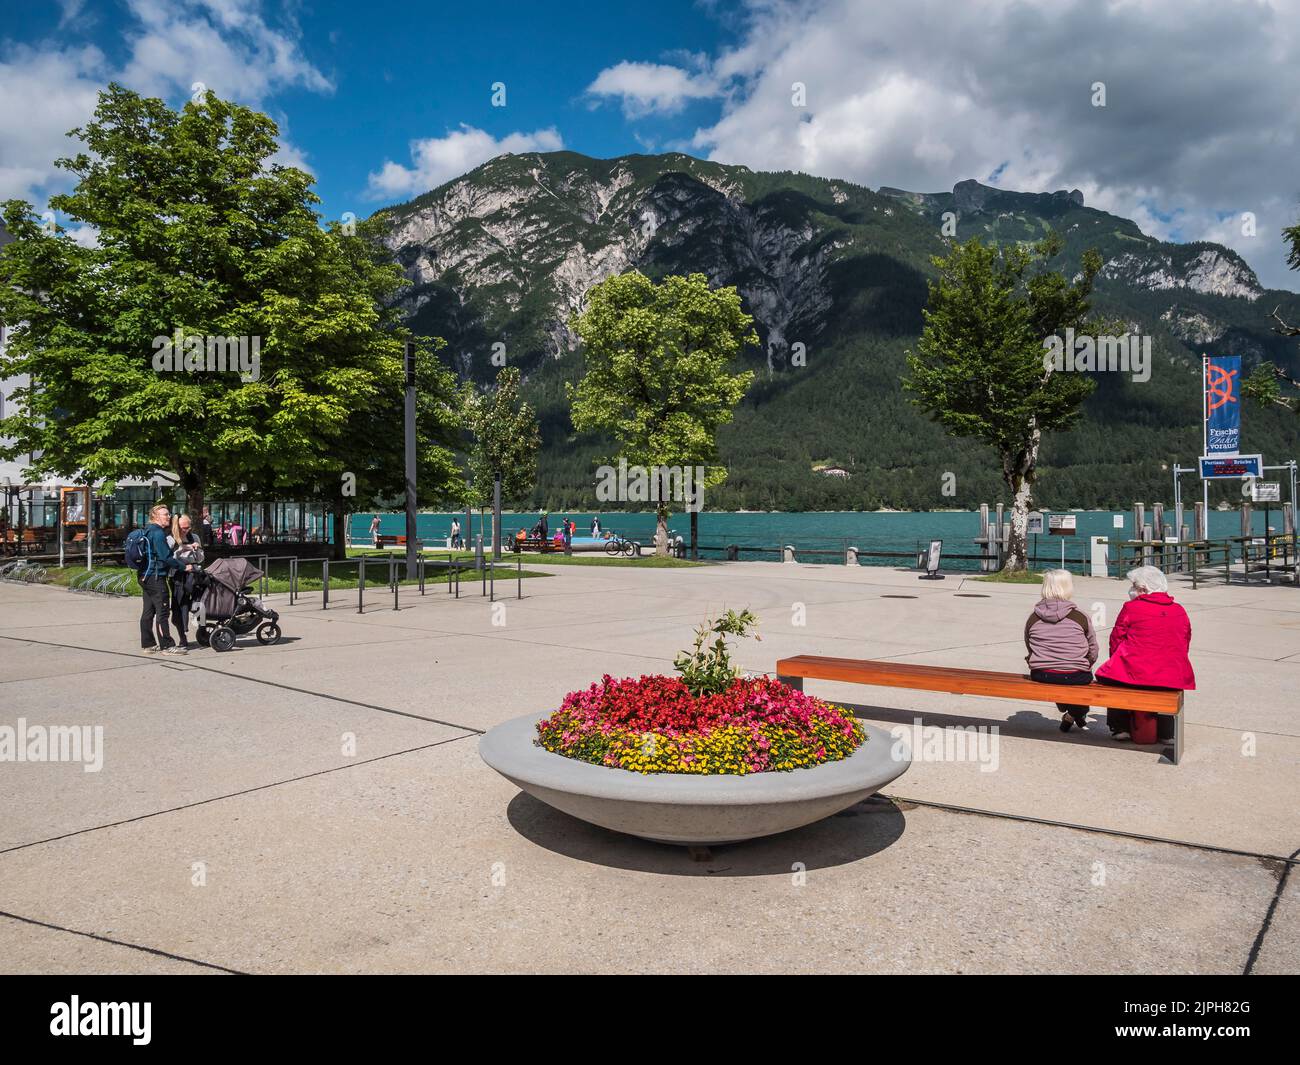 Picturesque Achensee in the Karwendel mountains of the Austrian Tirol seen here from the lakeside promenade at the resort town of Pertisau Stock Photo